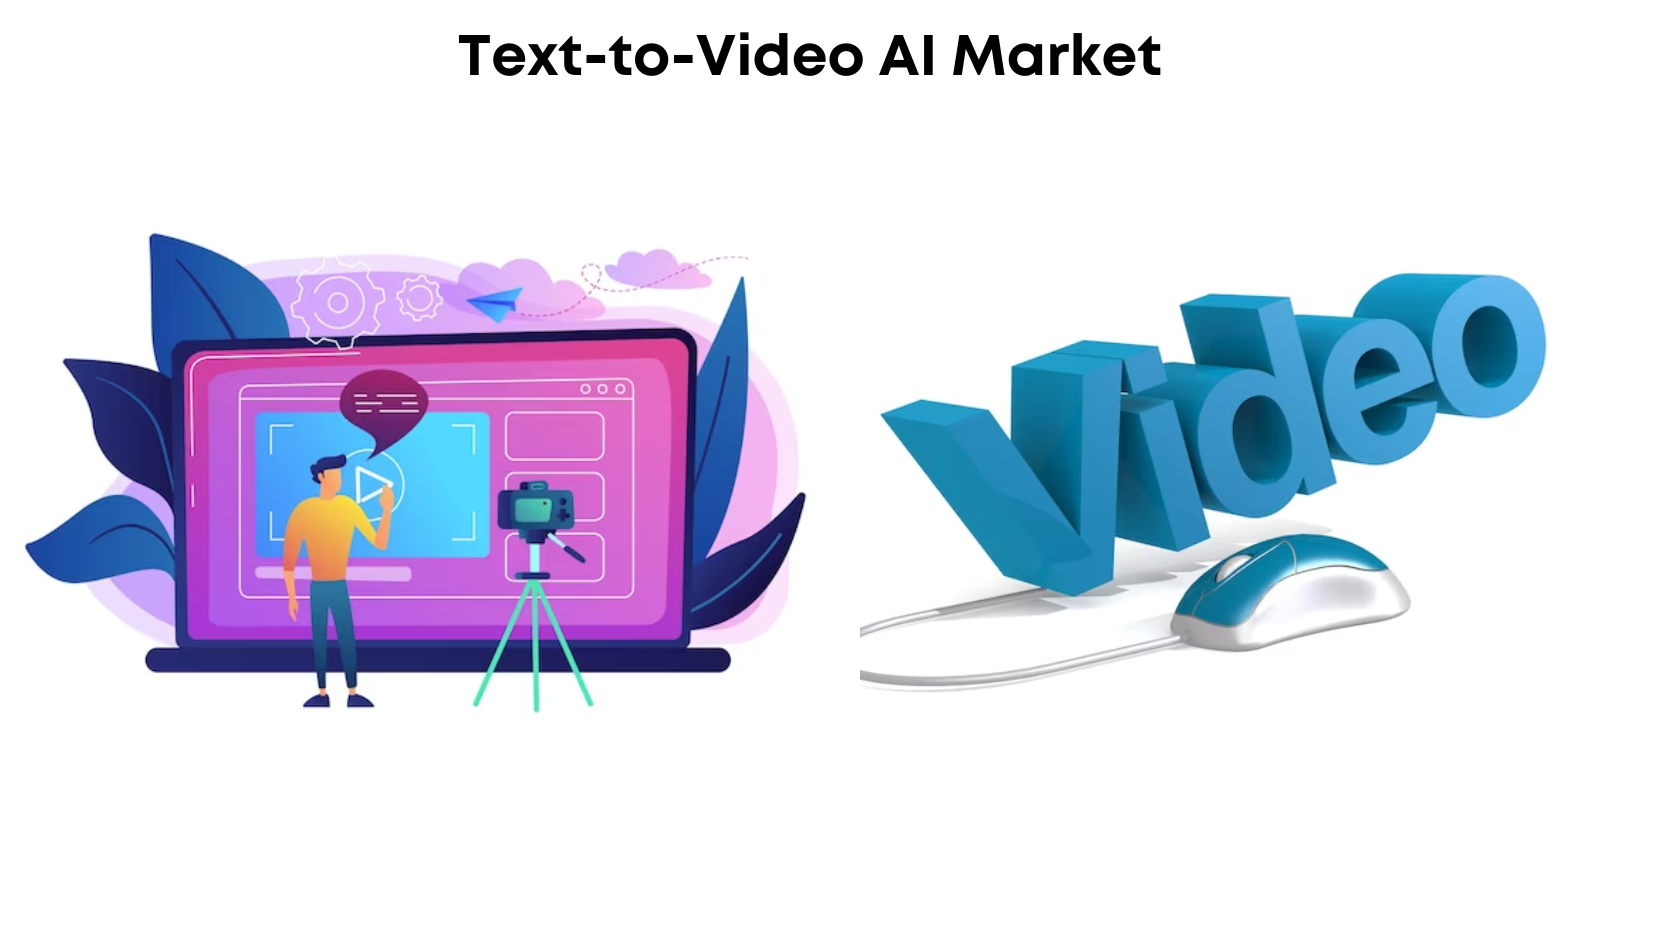 Text-to-Video AI Market is Predicted USD 2479.7 Million in Revenues by 2032 at a CAGR of 26.2%